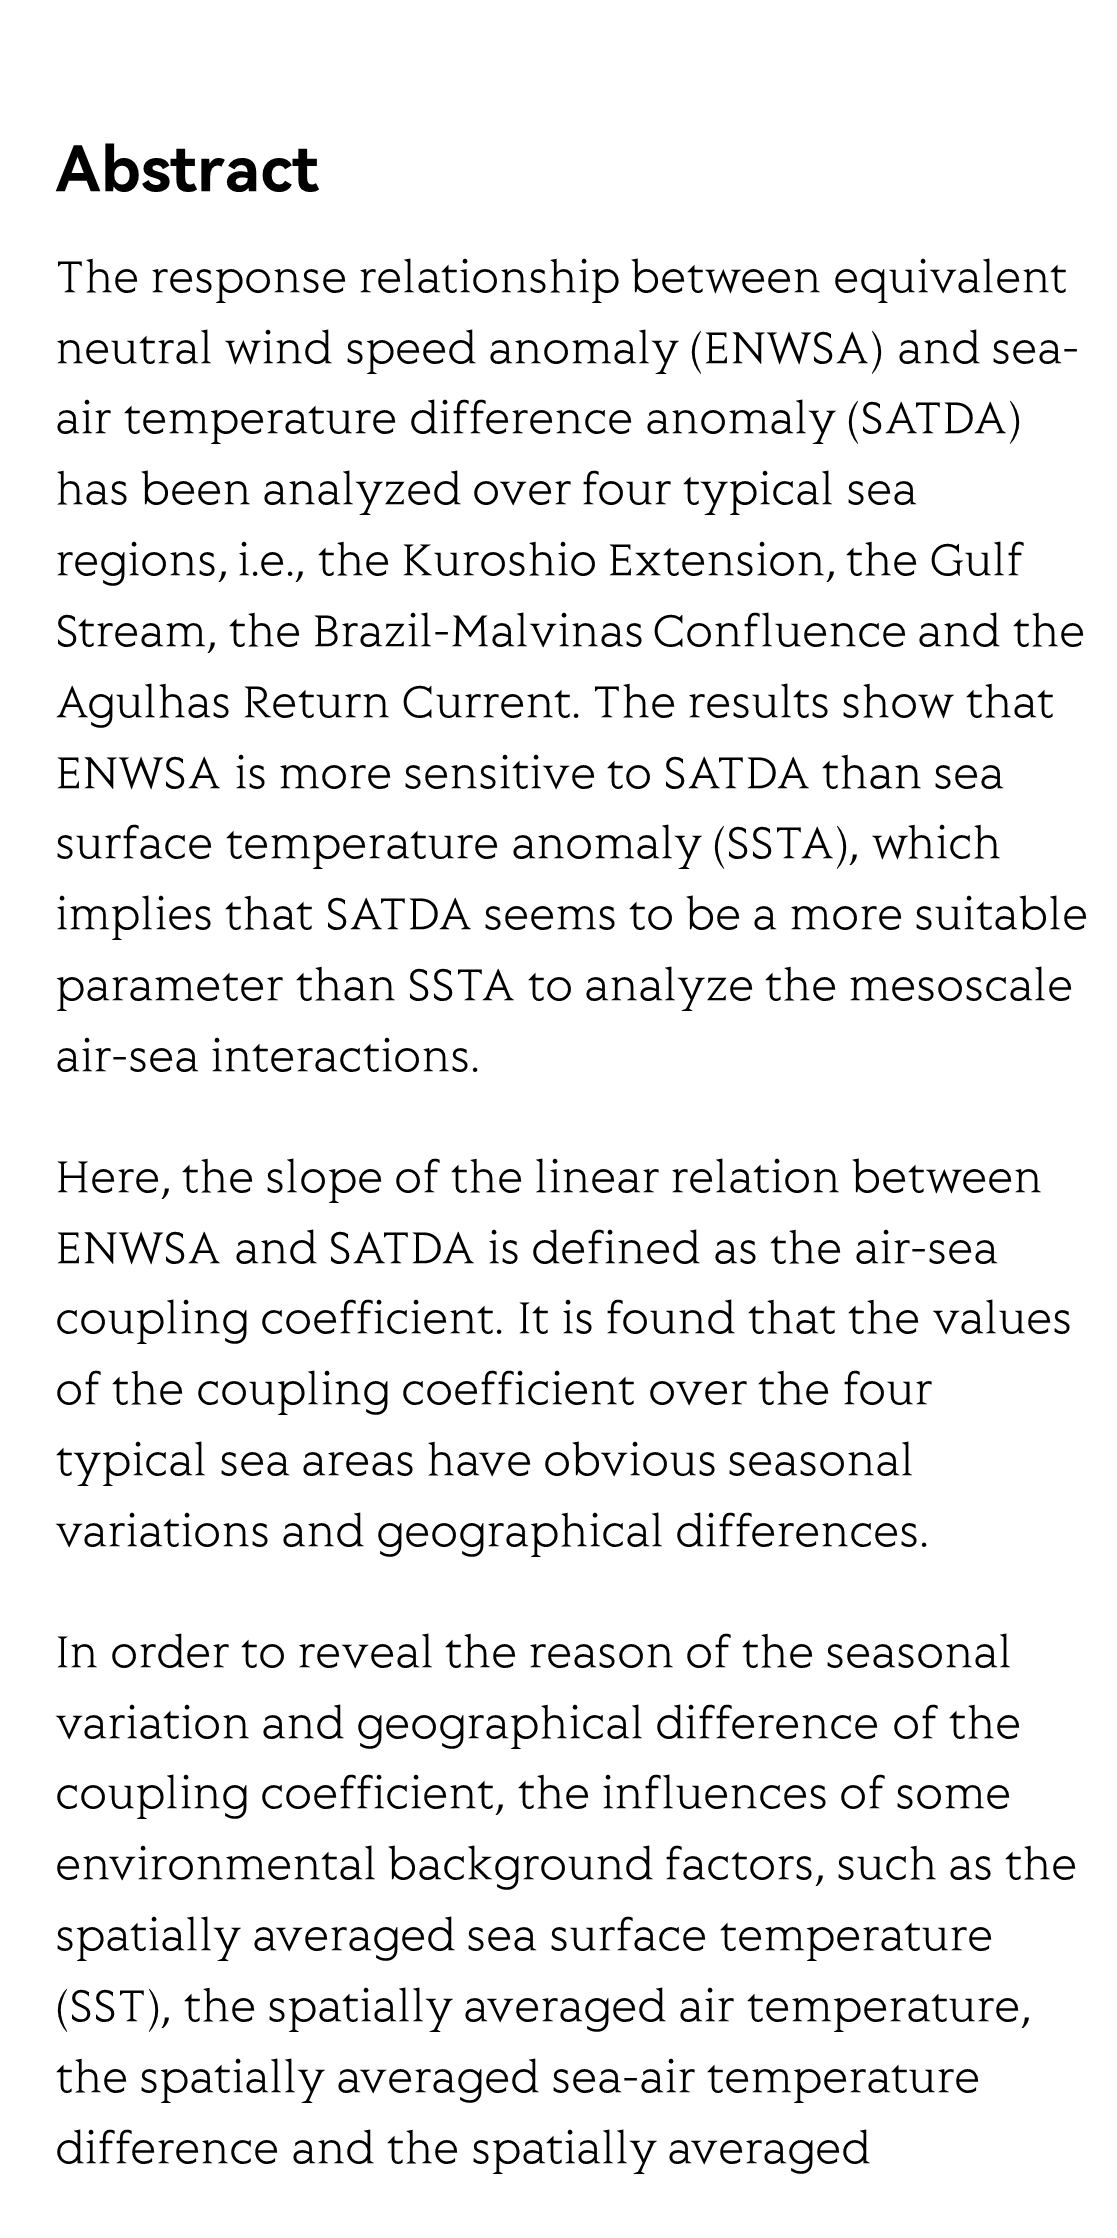 The influences of environmental factors on the air-sea coupling coefficient_2